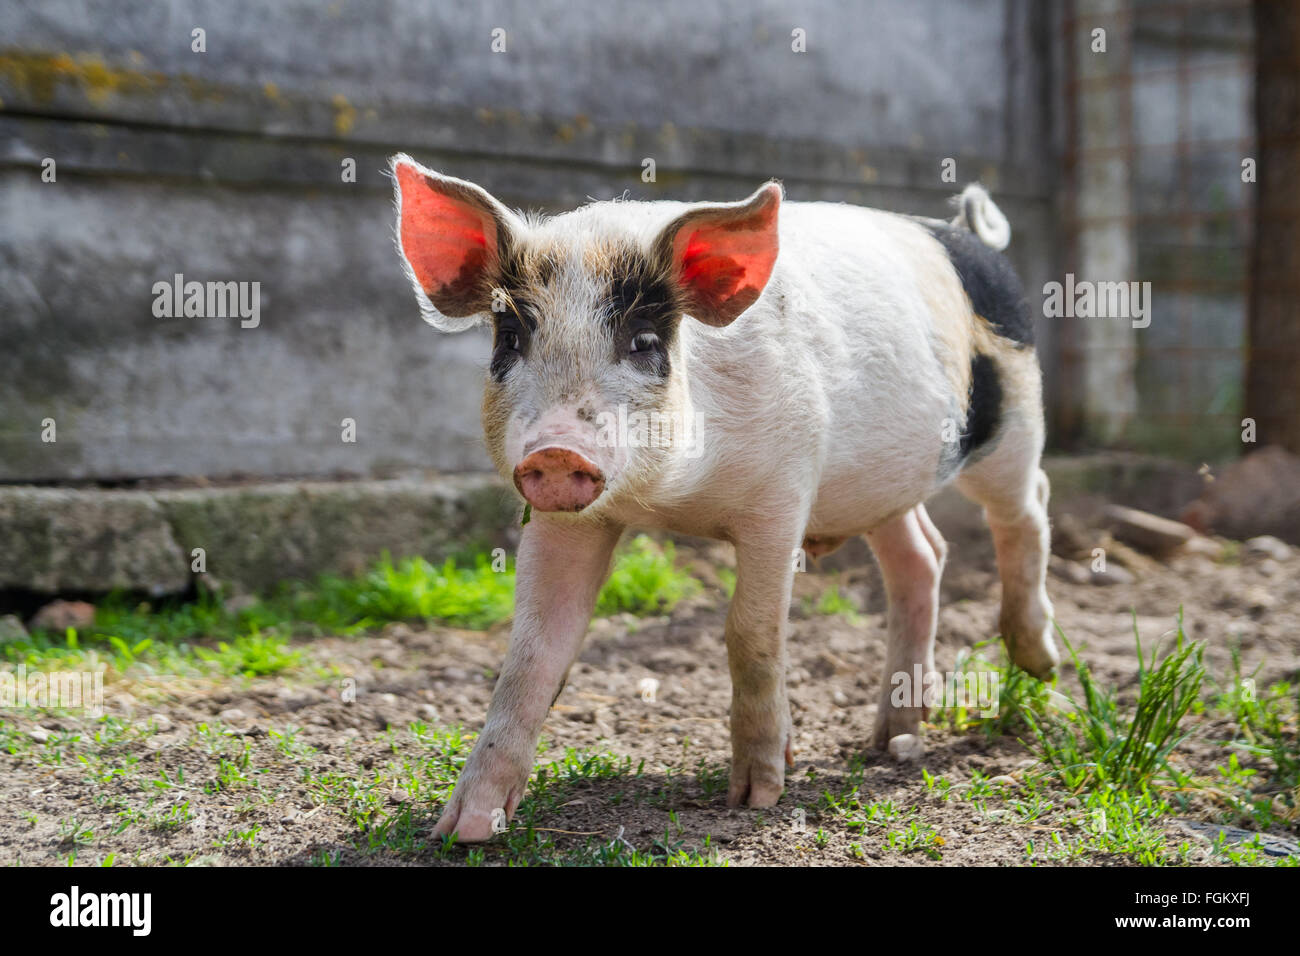 Happy black spotted piglet in grass Banque D'Images